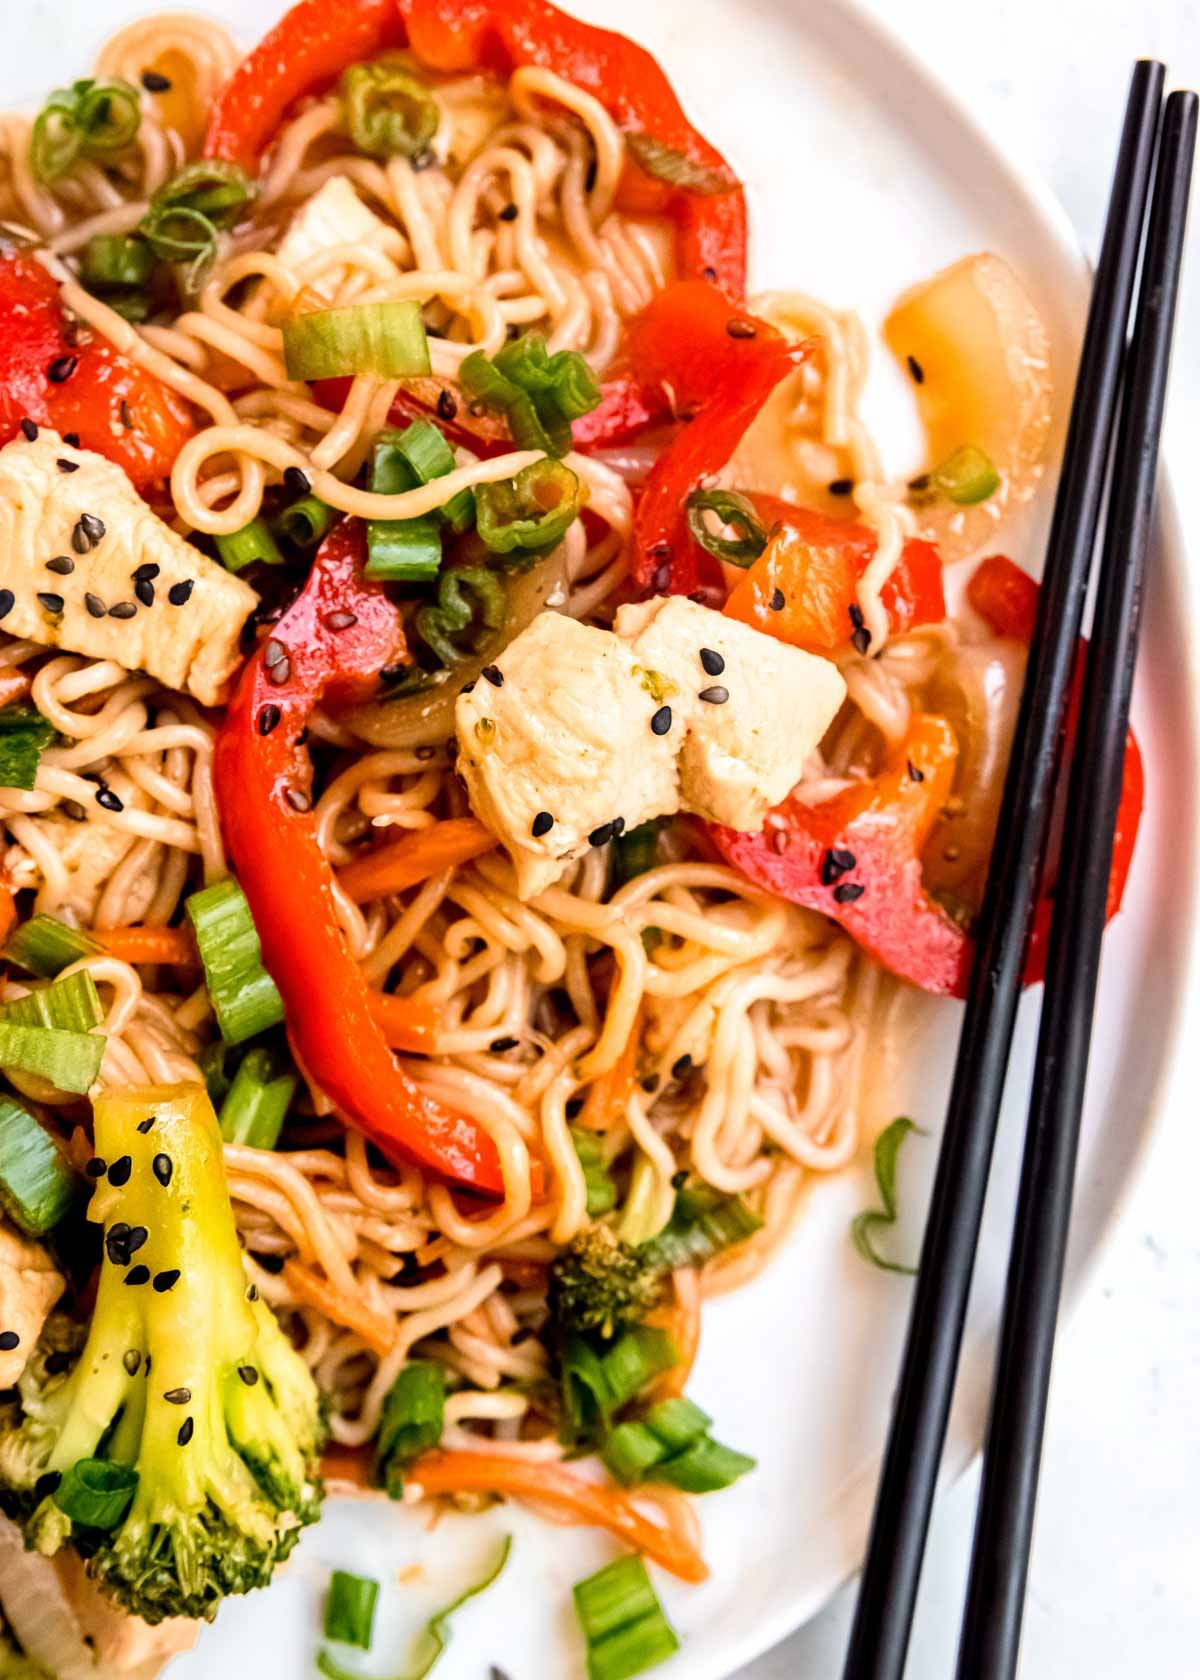 a white plate filled with stir fry with shirataki noodles, red peppers, broccoli, carrots, and onions; chopsticks on the side